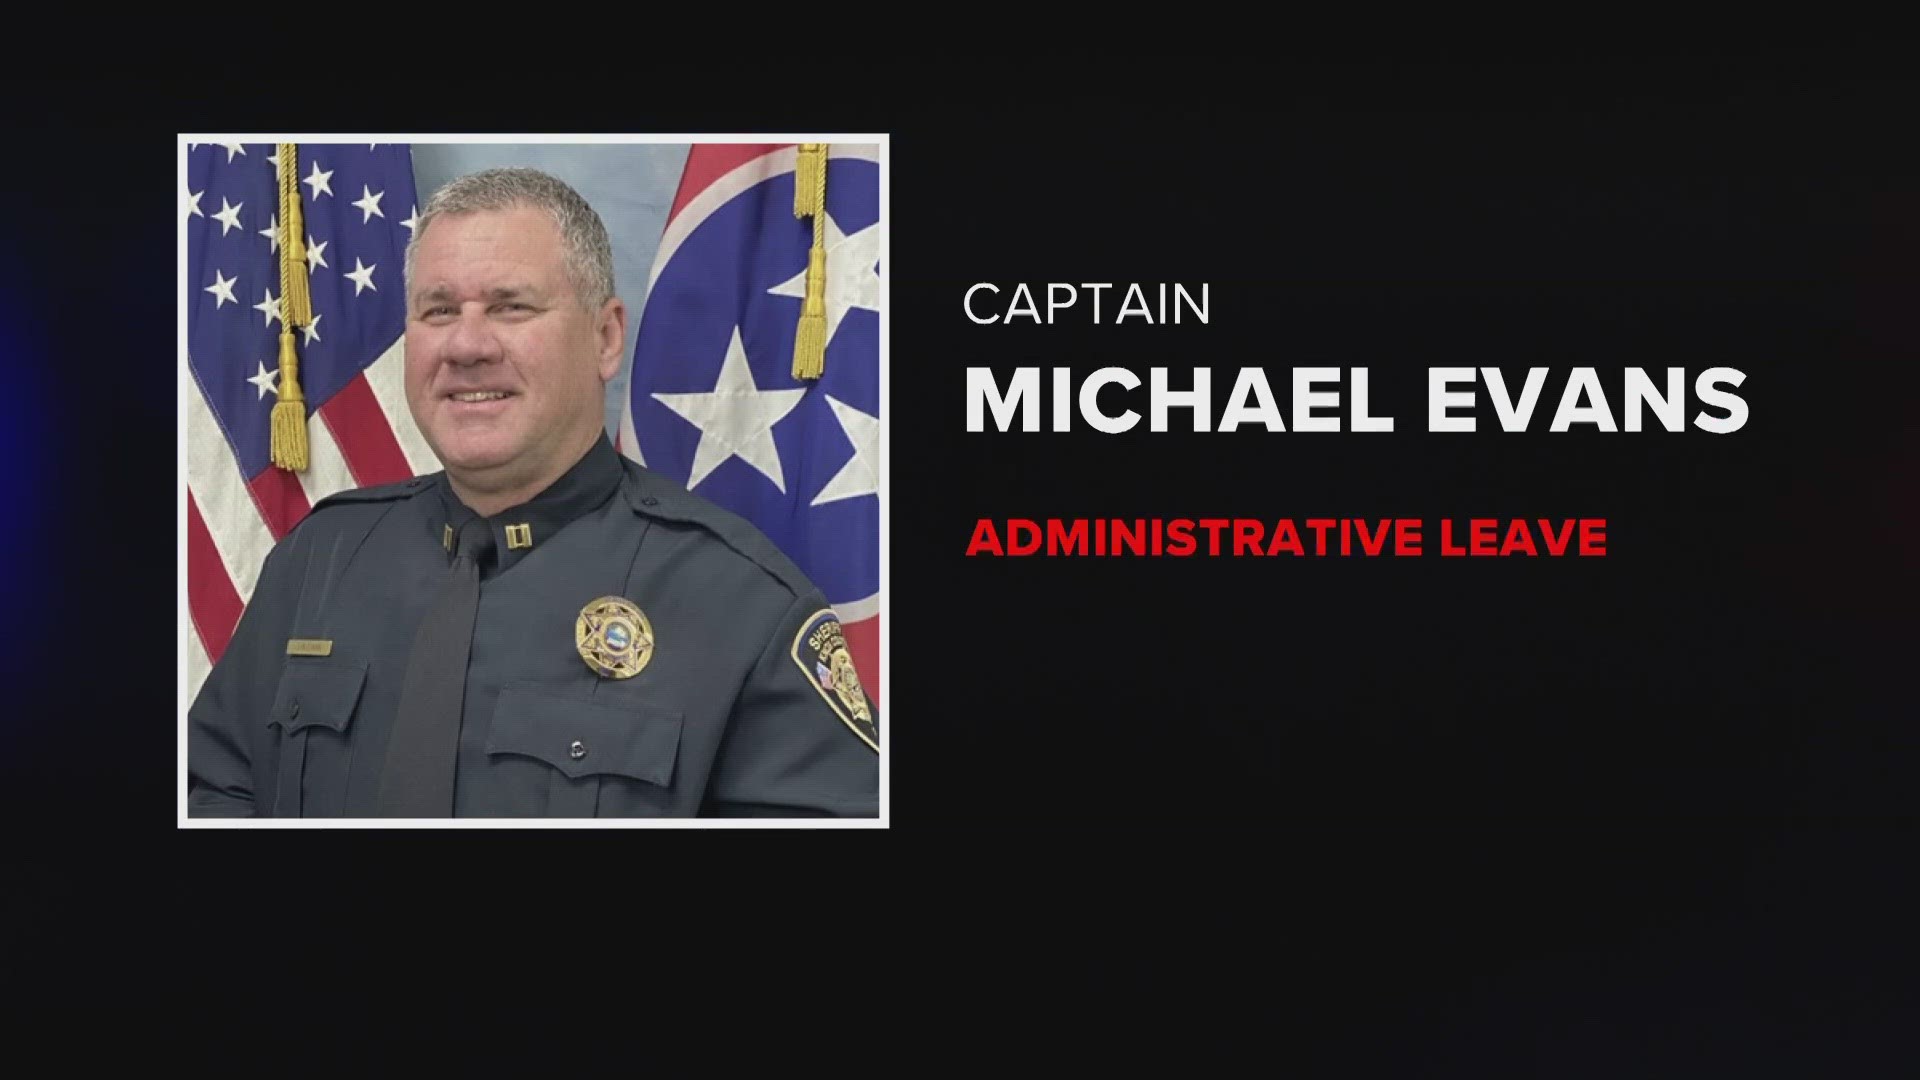 Capt. Mike Evans is currently on paid leave following an incident at an area restaurant.